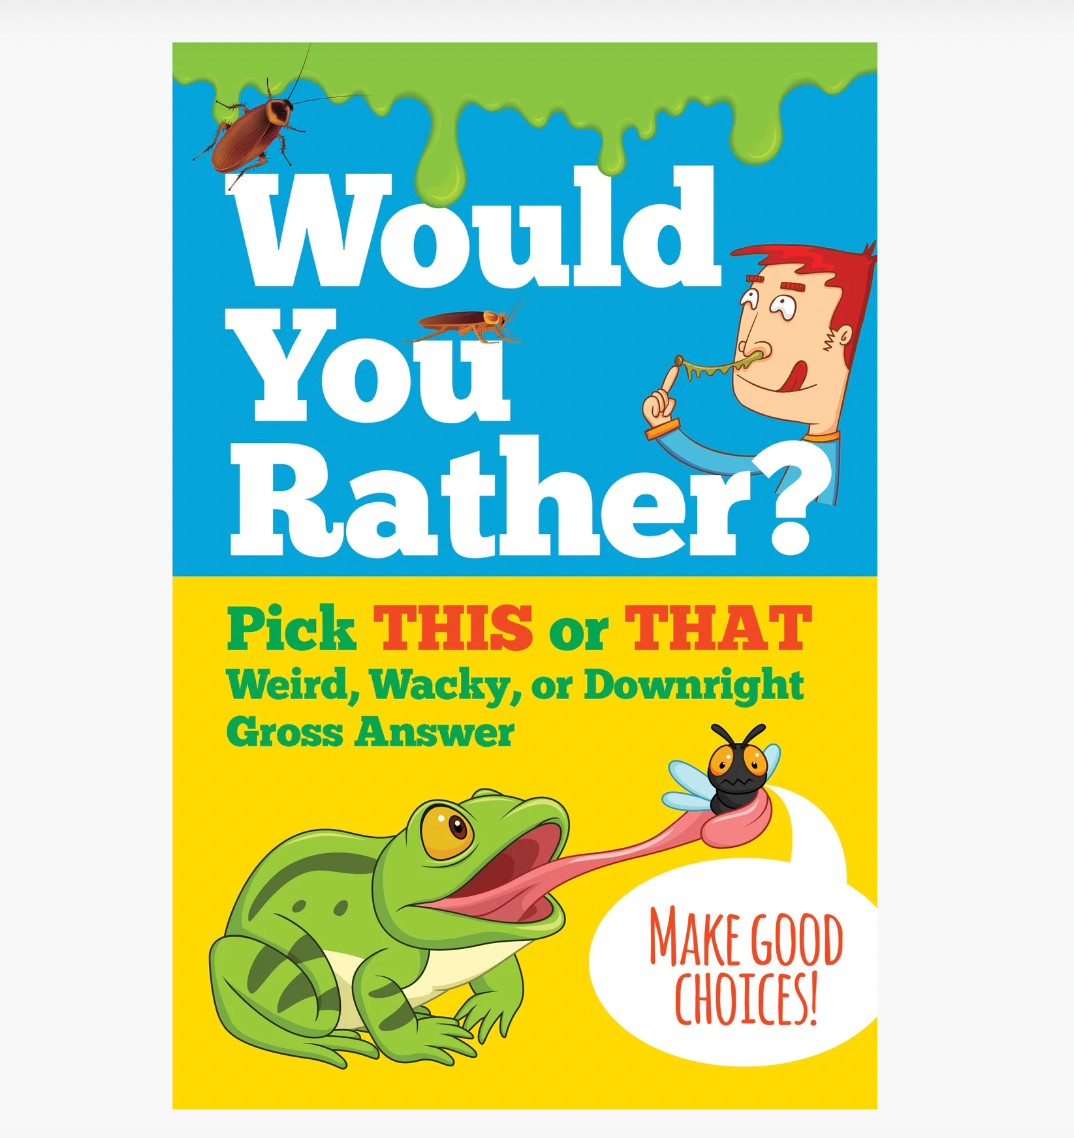 Would You Rather? Pick THIS or THAT Weird, Wacky, or Downright Gross Answer